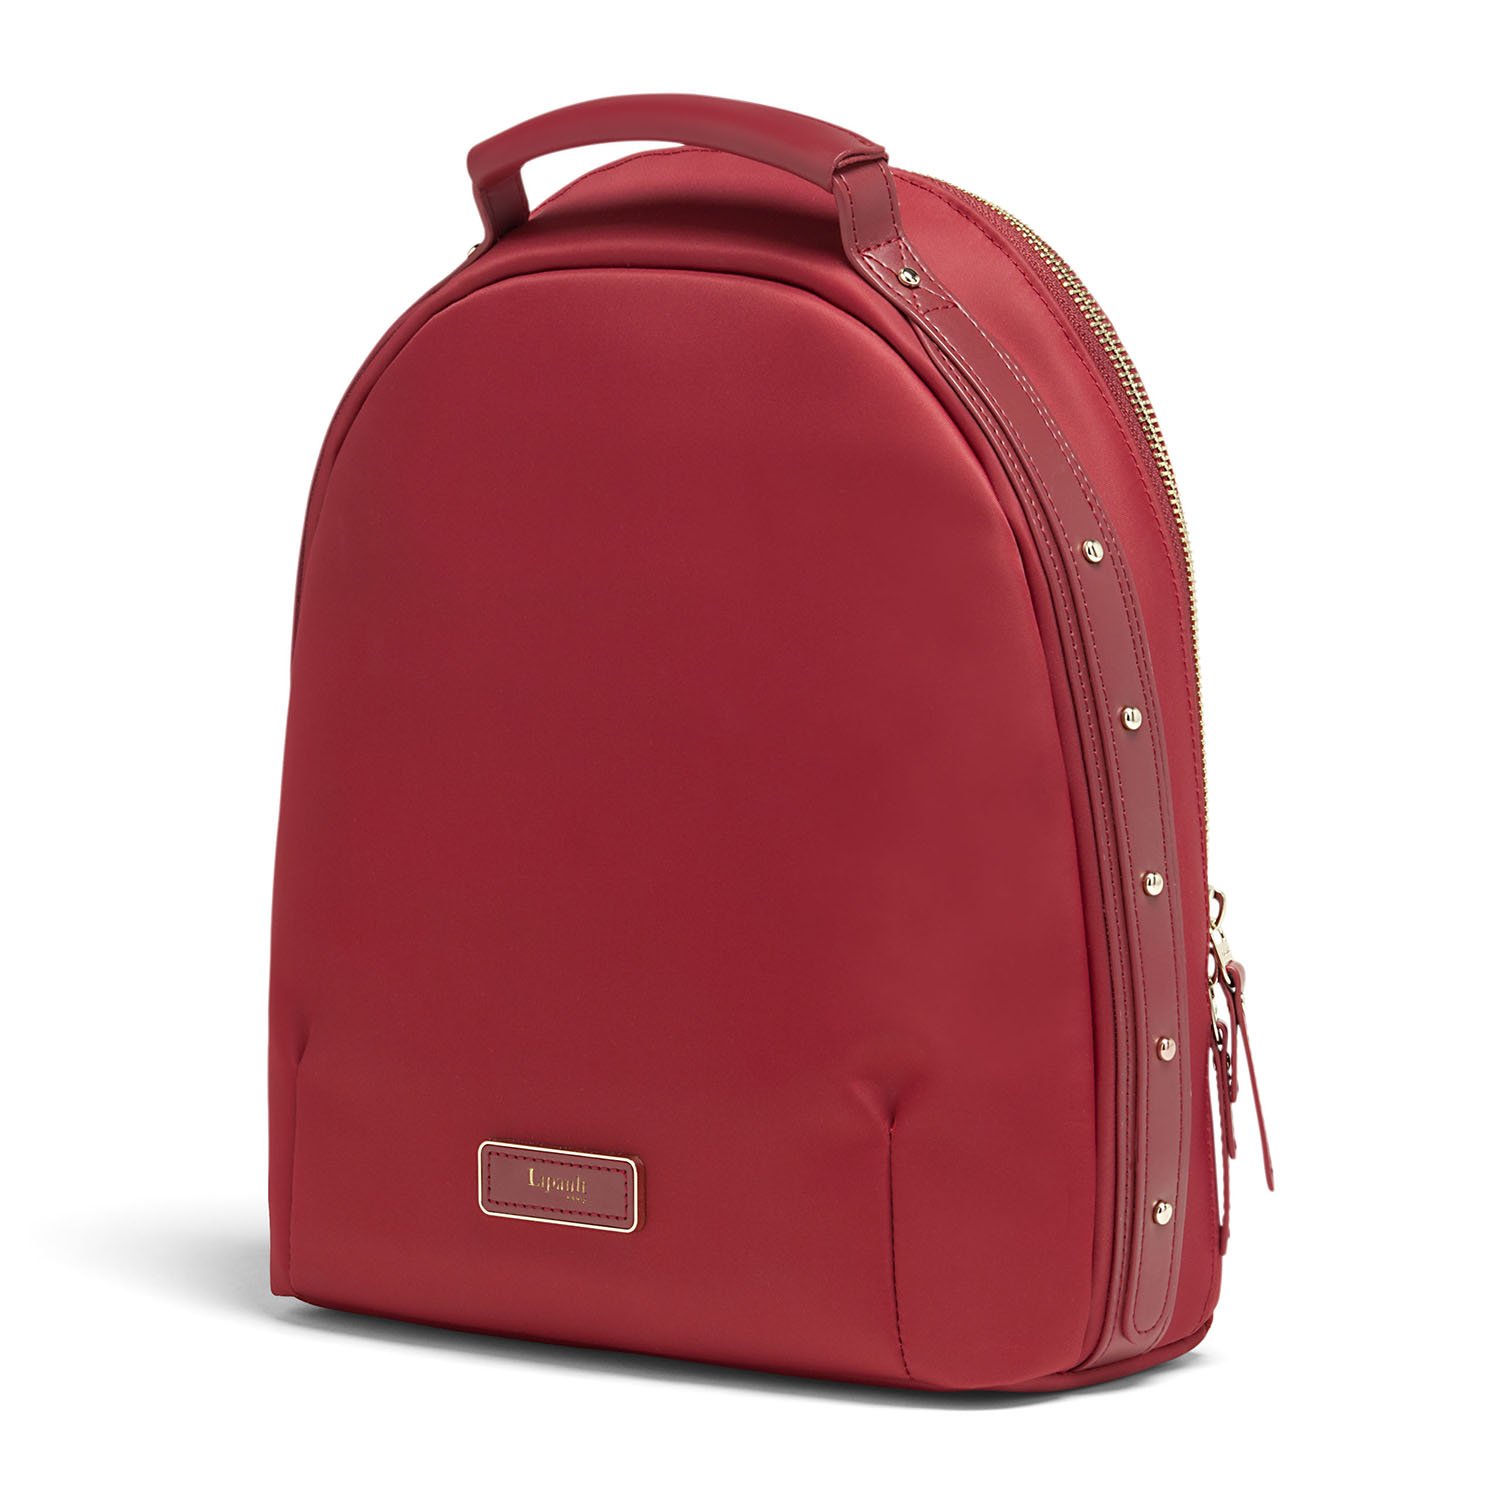 BUSINESS AVENUE-BACKPACK S SP79-002-SF000*70